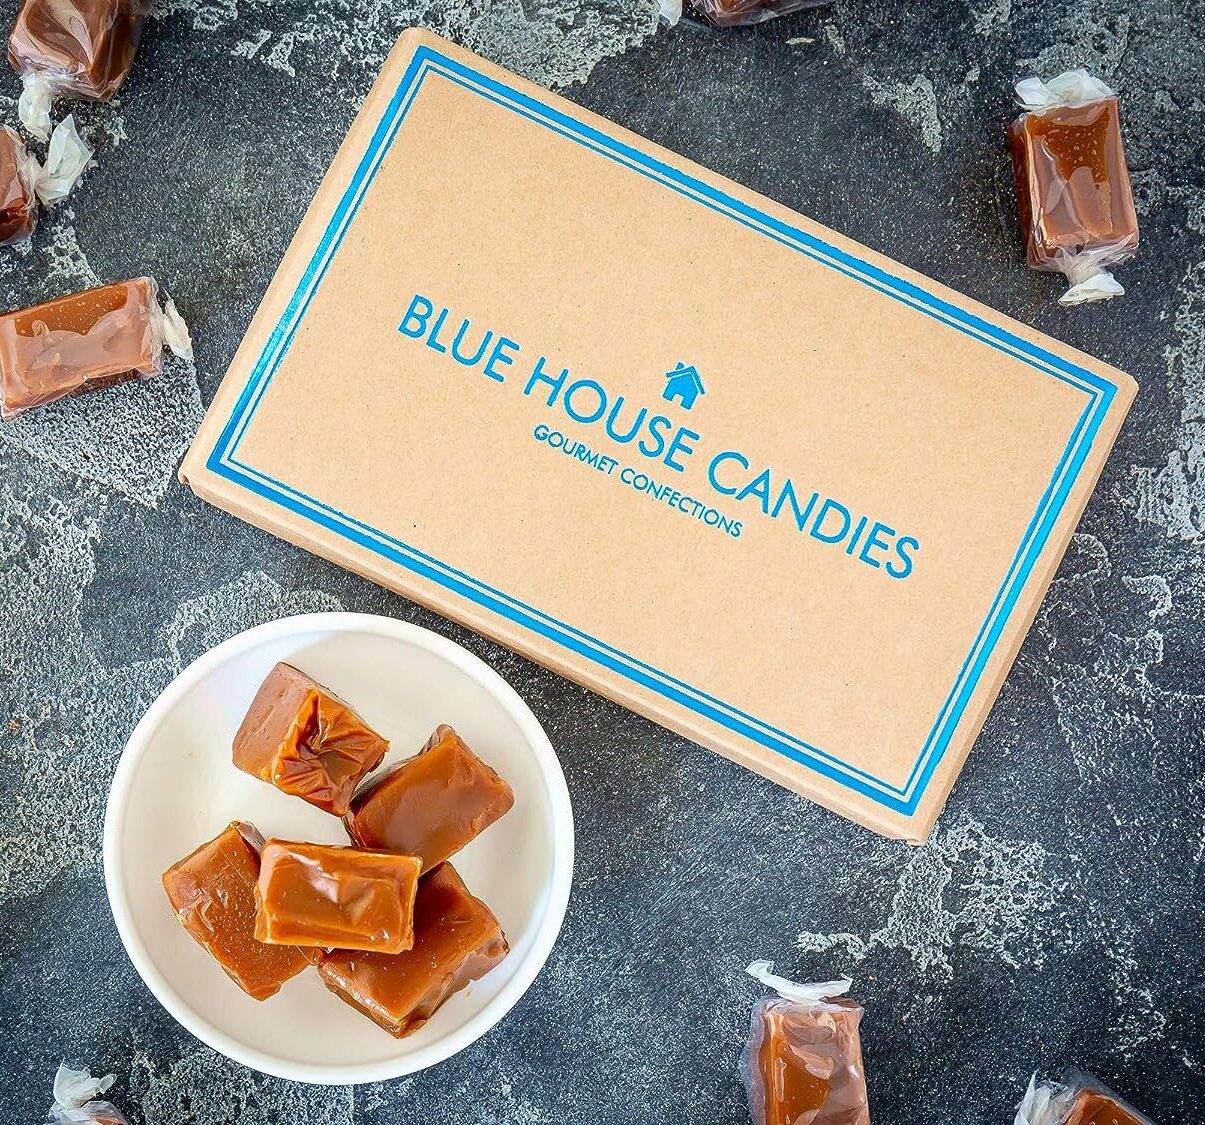 Blue House Soft and Chewy Handcrafted Gourmet Caramel Candies, Gift Boxed (Original Caramels),1 pound